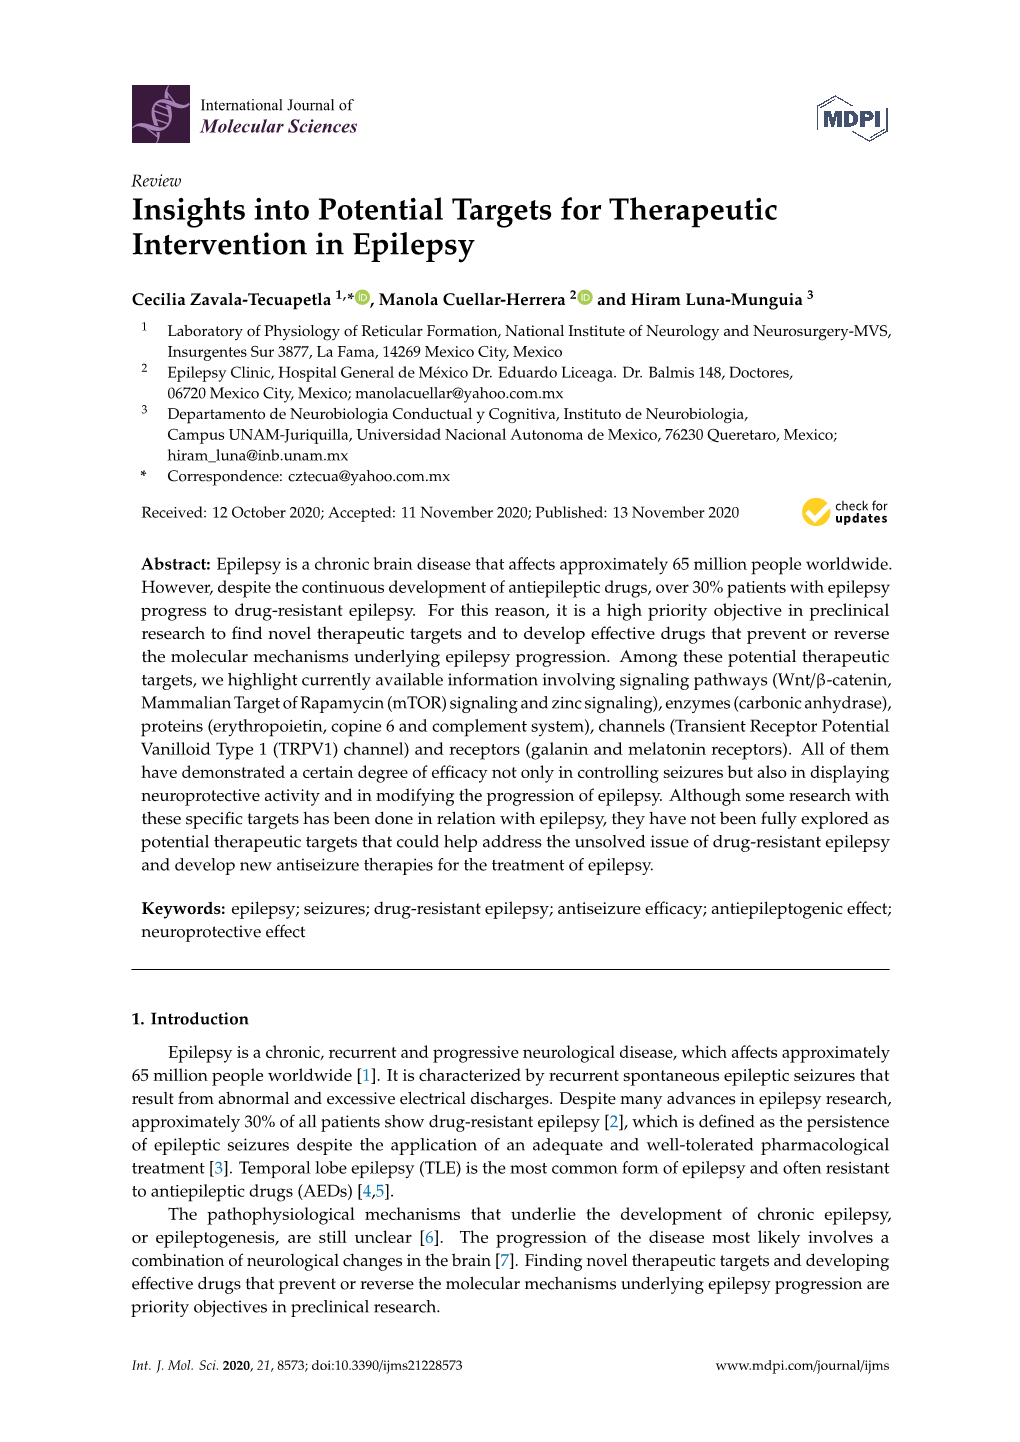 Insights Into Potential Targets for Therapeutic Intervention in Epilepsy